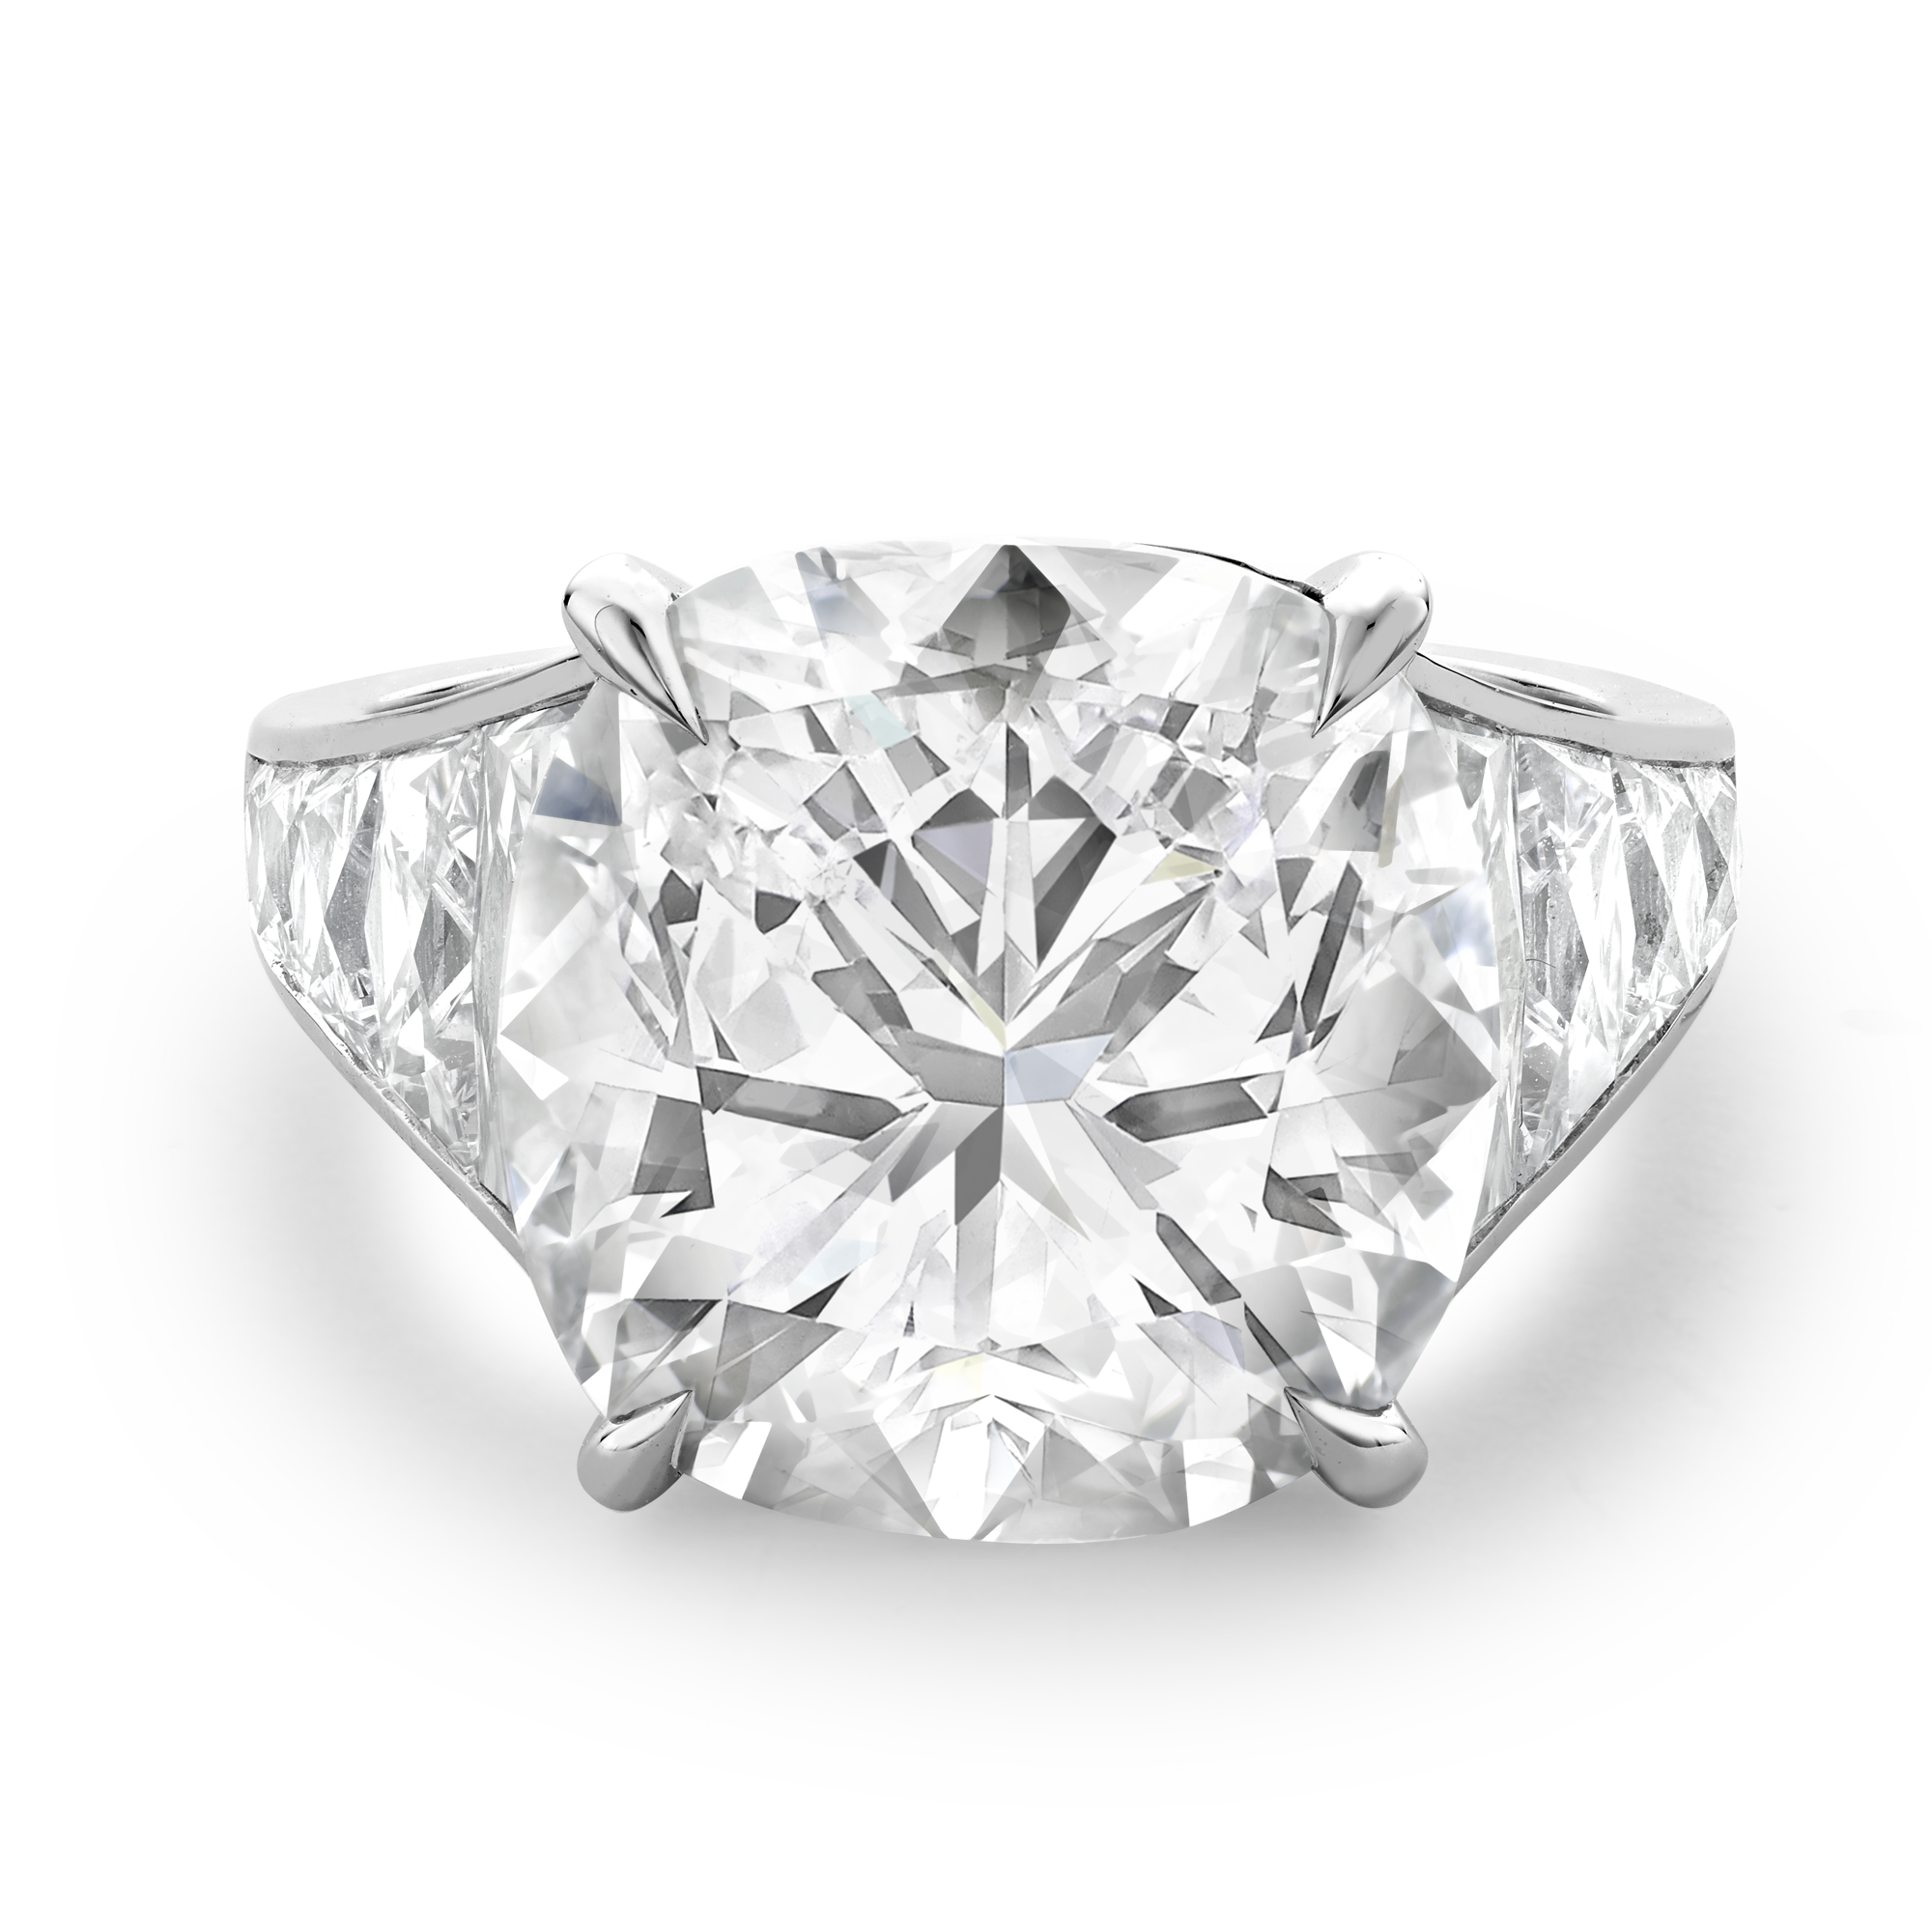 Masterpiece Pragnell Setting 10.07ct Diamond Solitaire Ring Cushion Antique Cut, Claw Set, GIA Certified_2